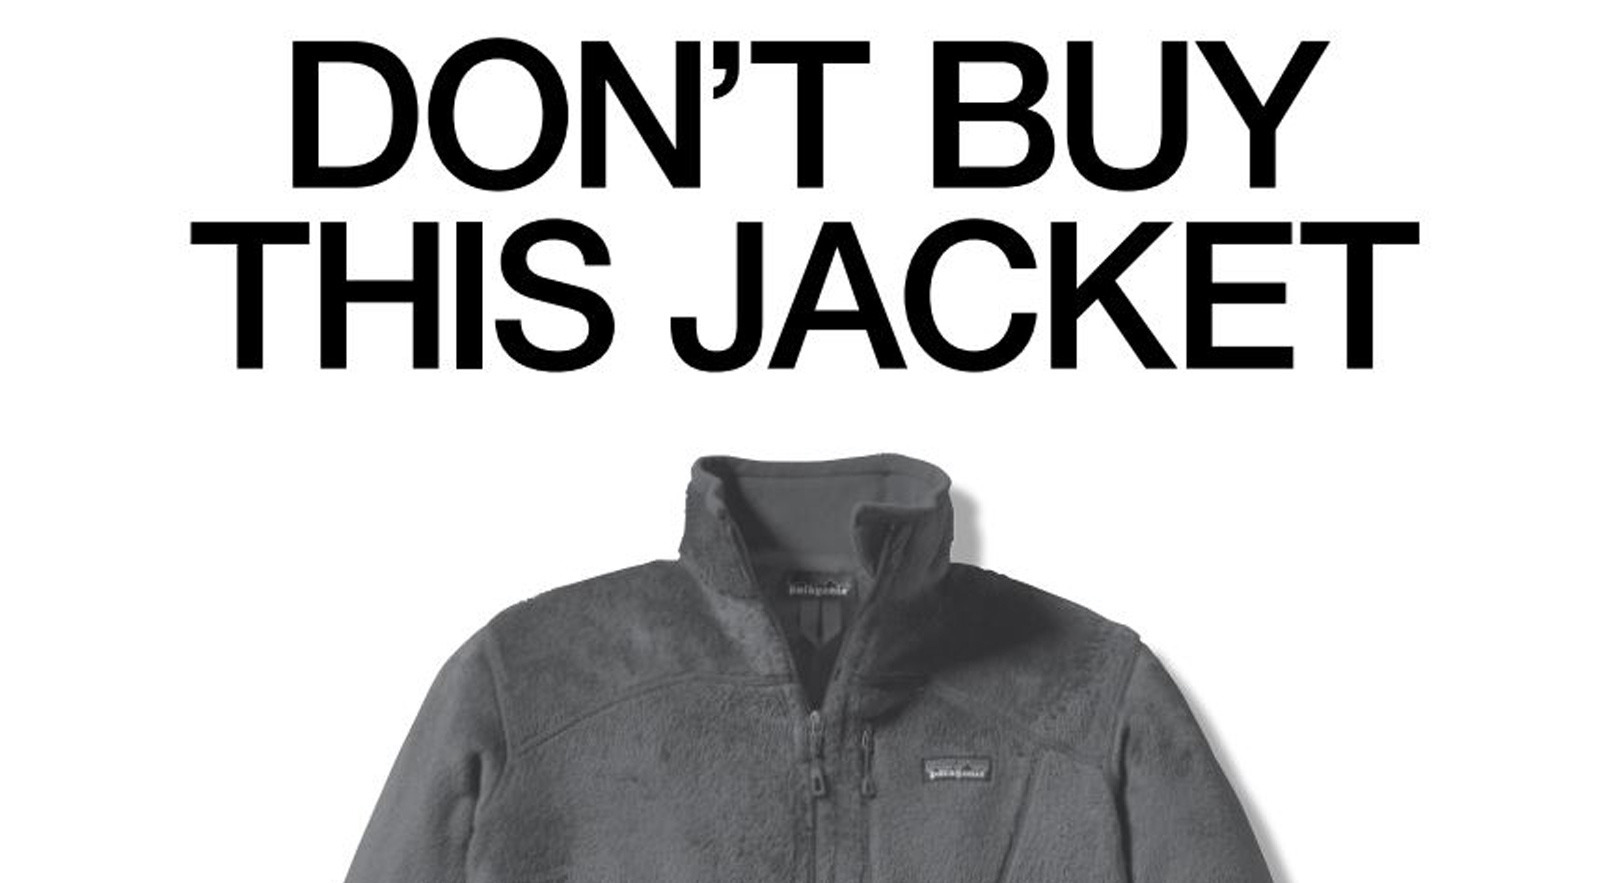 Except of ad with these large words in all caps: "Don't buy this jacket." Below, cropped picture of a gray jacket 